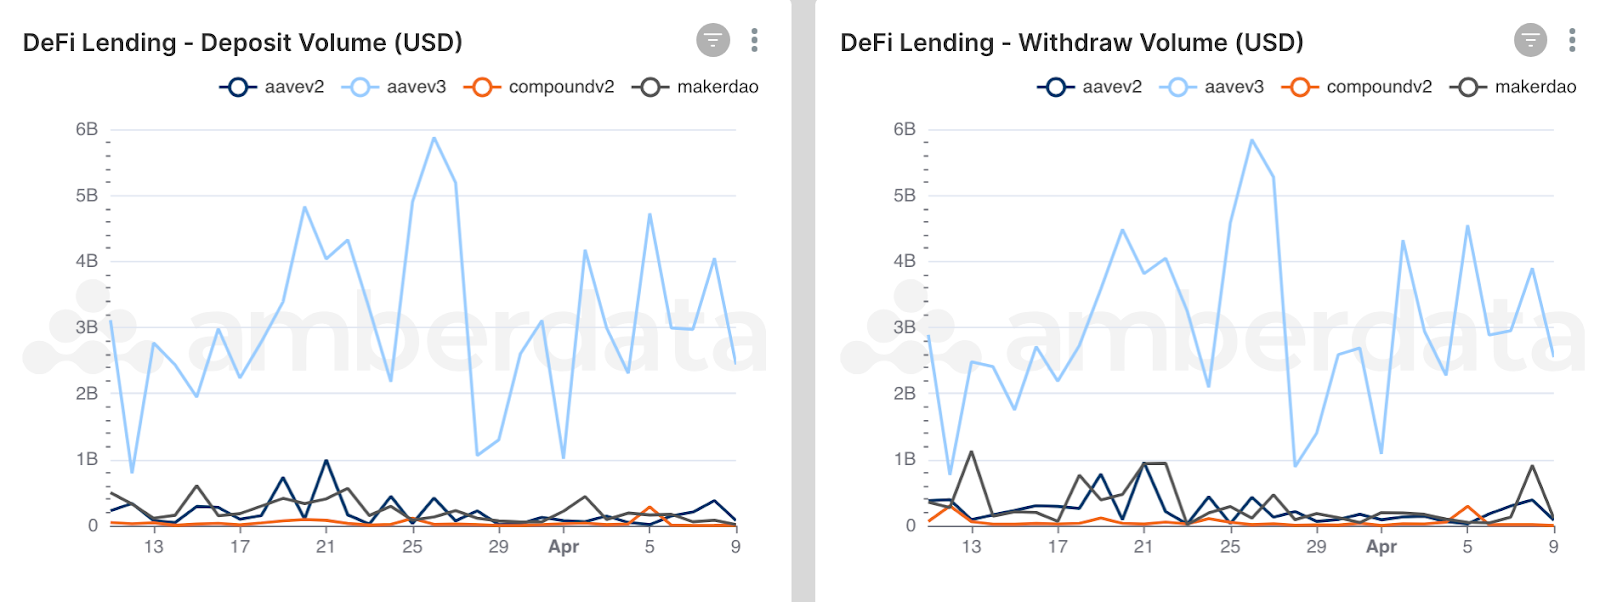 Amberdata API DeFi Lending deposit and withdraw volumes over the last 30 days. Aave, compound and MakerDAO